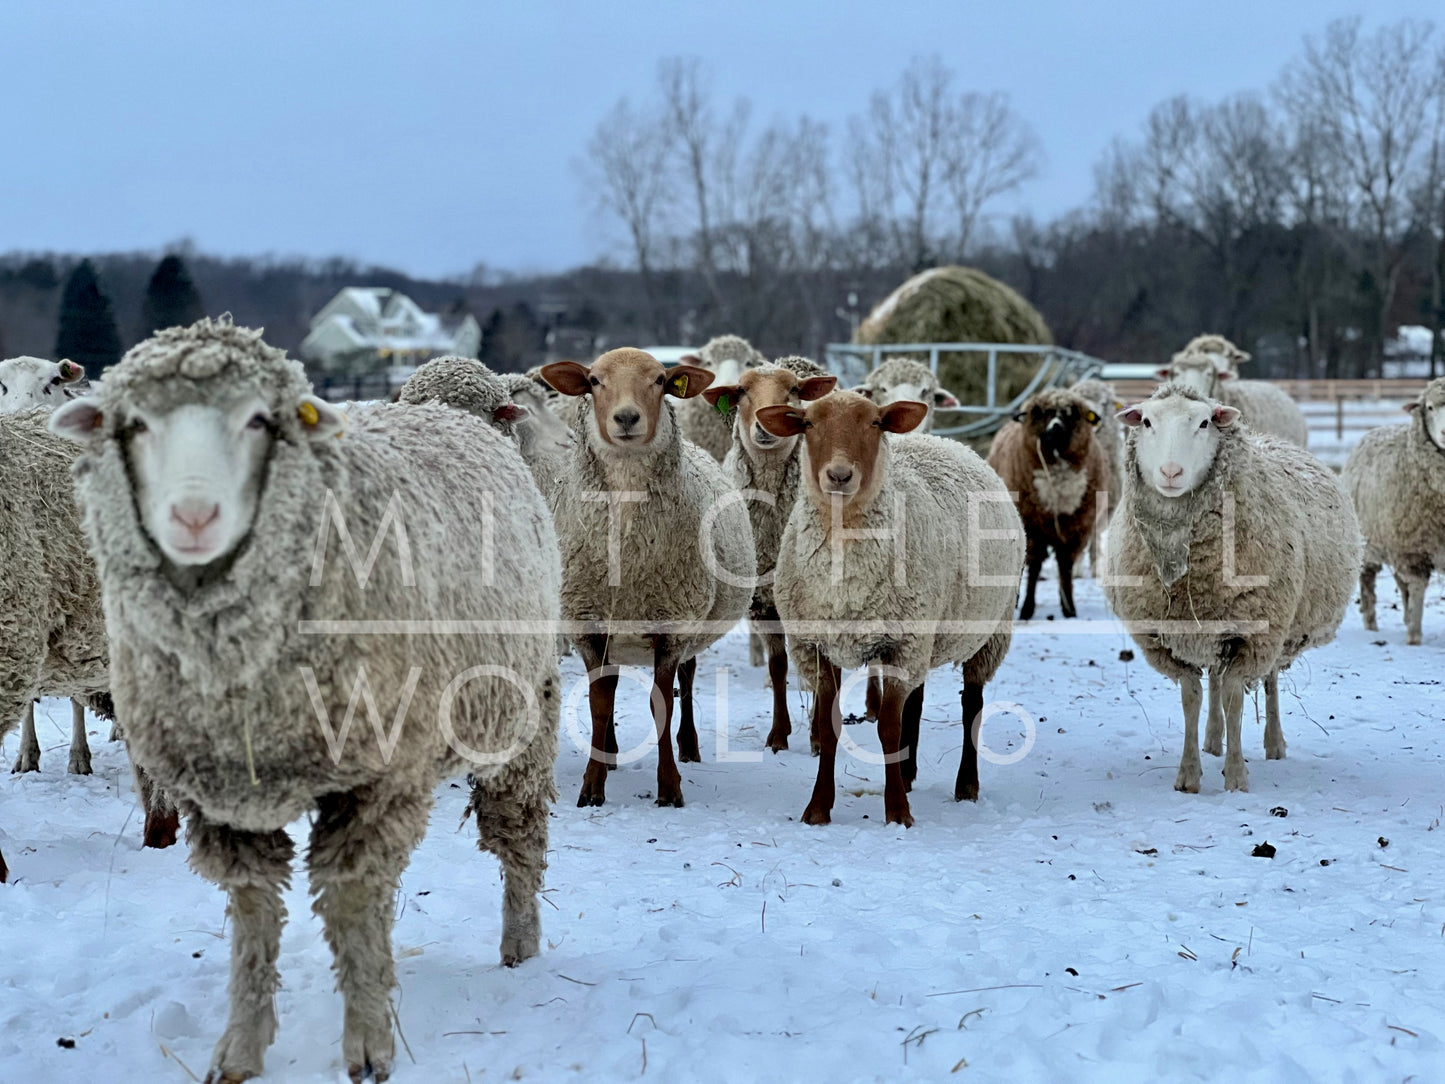 The Mitchell Wool flock of sheep stand at attention under a snowy winter sky